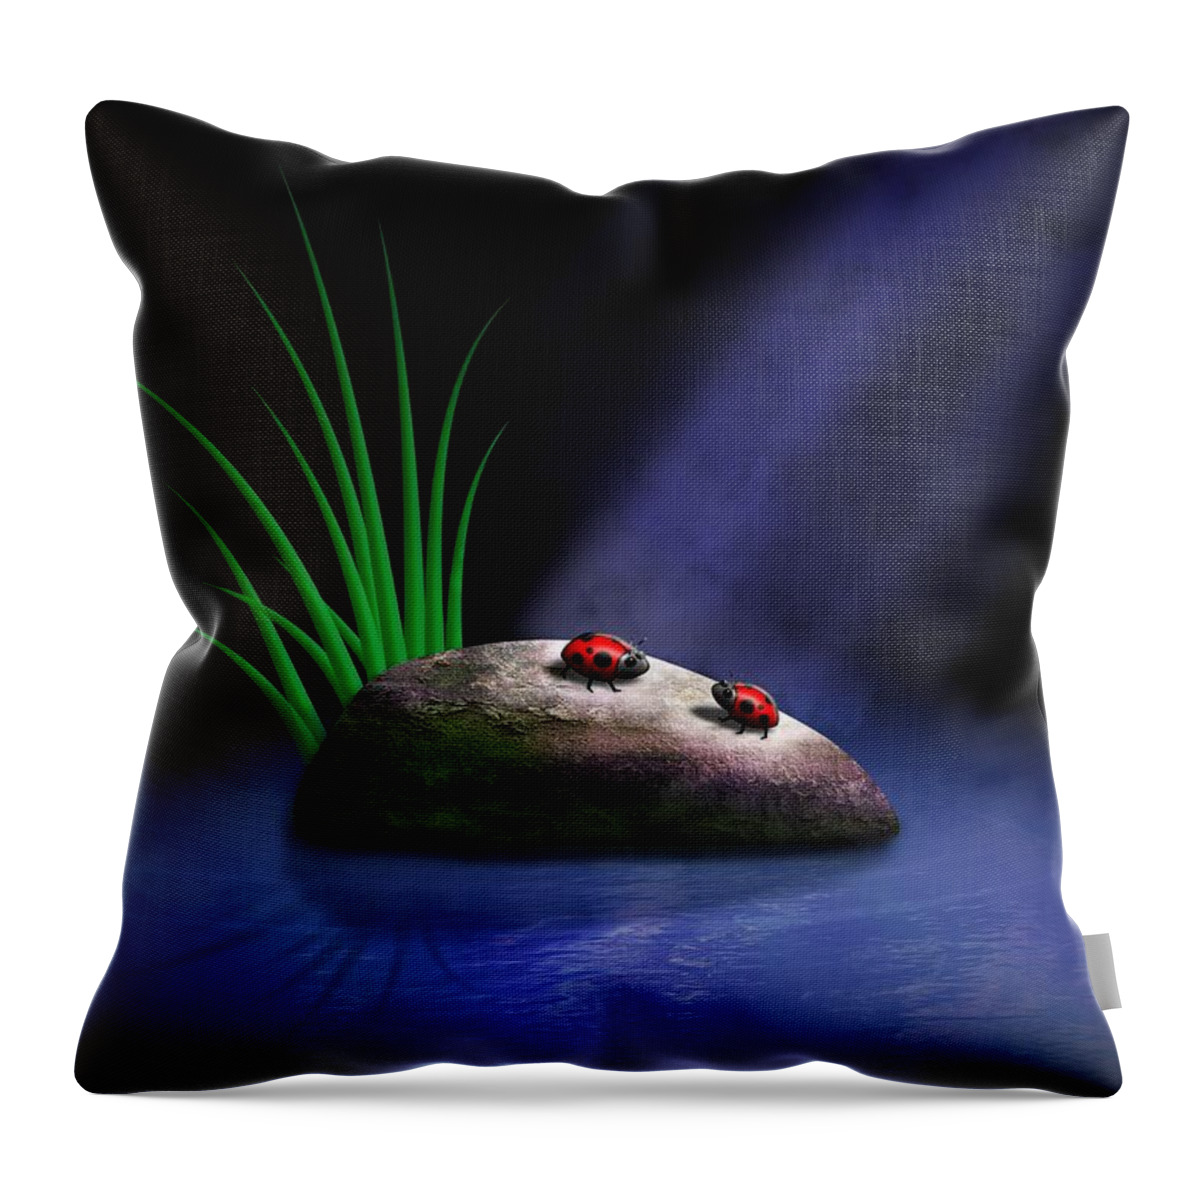 Lady Bugs Throw Pillow featuring the digital art The Conversation by John Wills